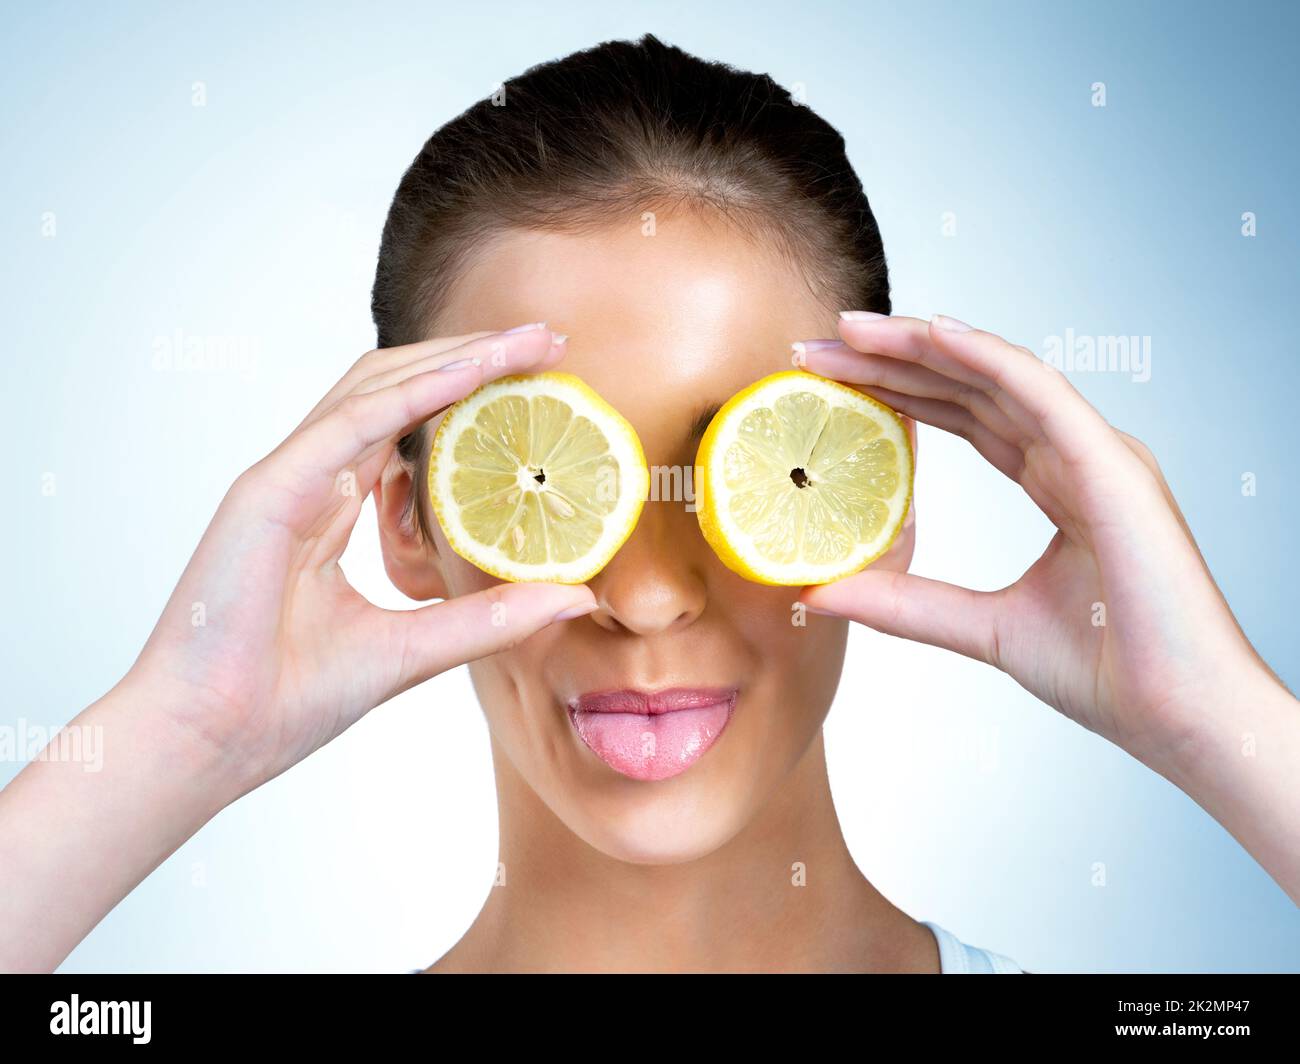 When life gives you lemons, pucker up. Shot of a health-conscious young woman posing with lemons over her eyes in studio. Stock Photo